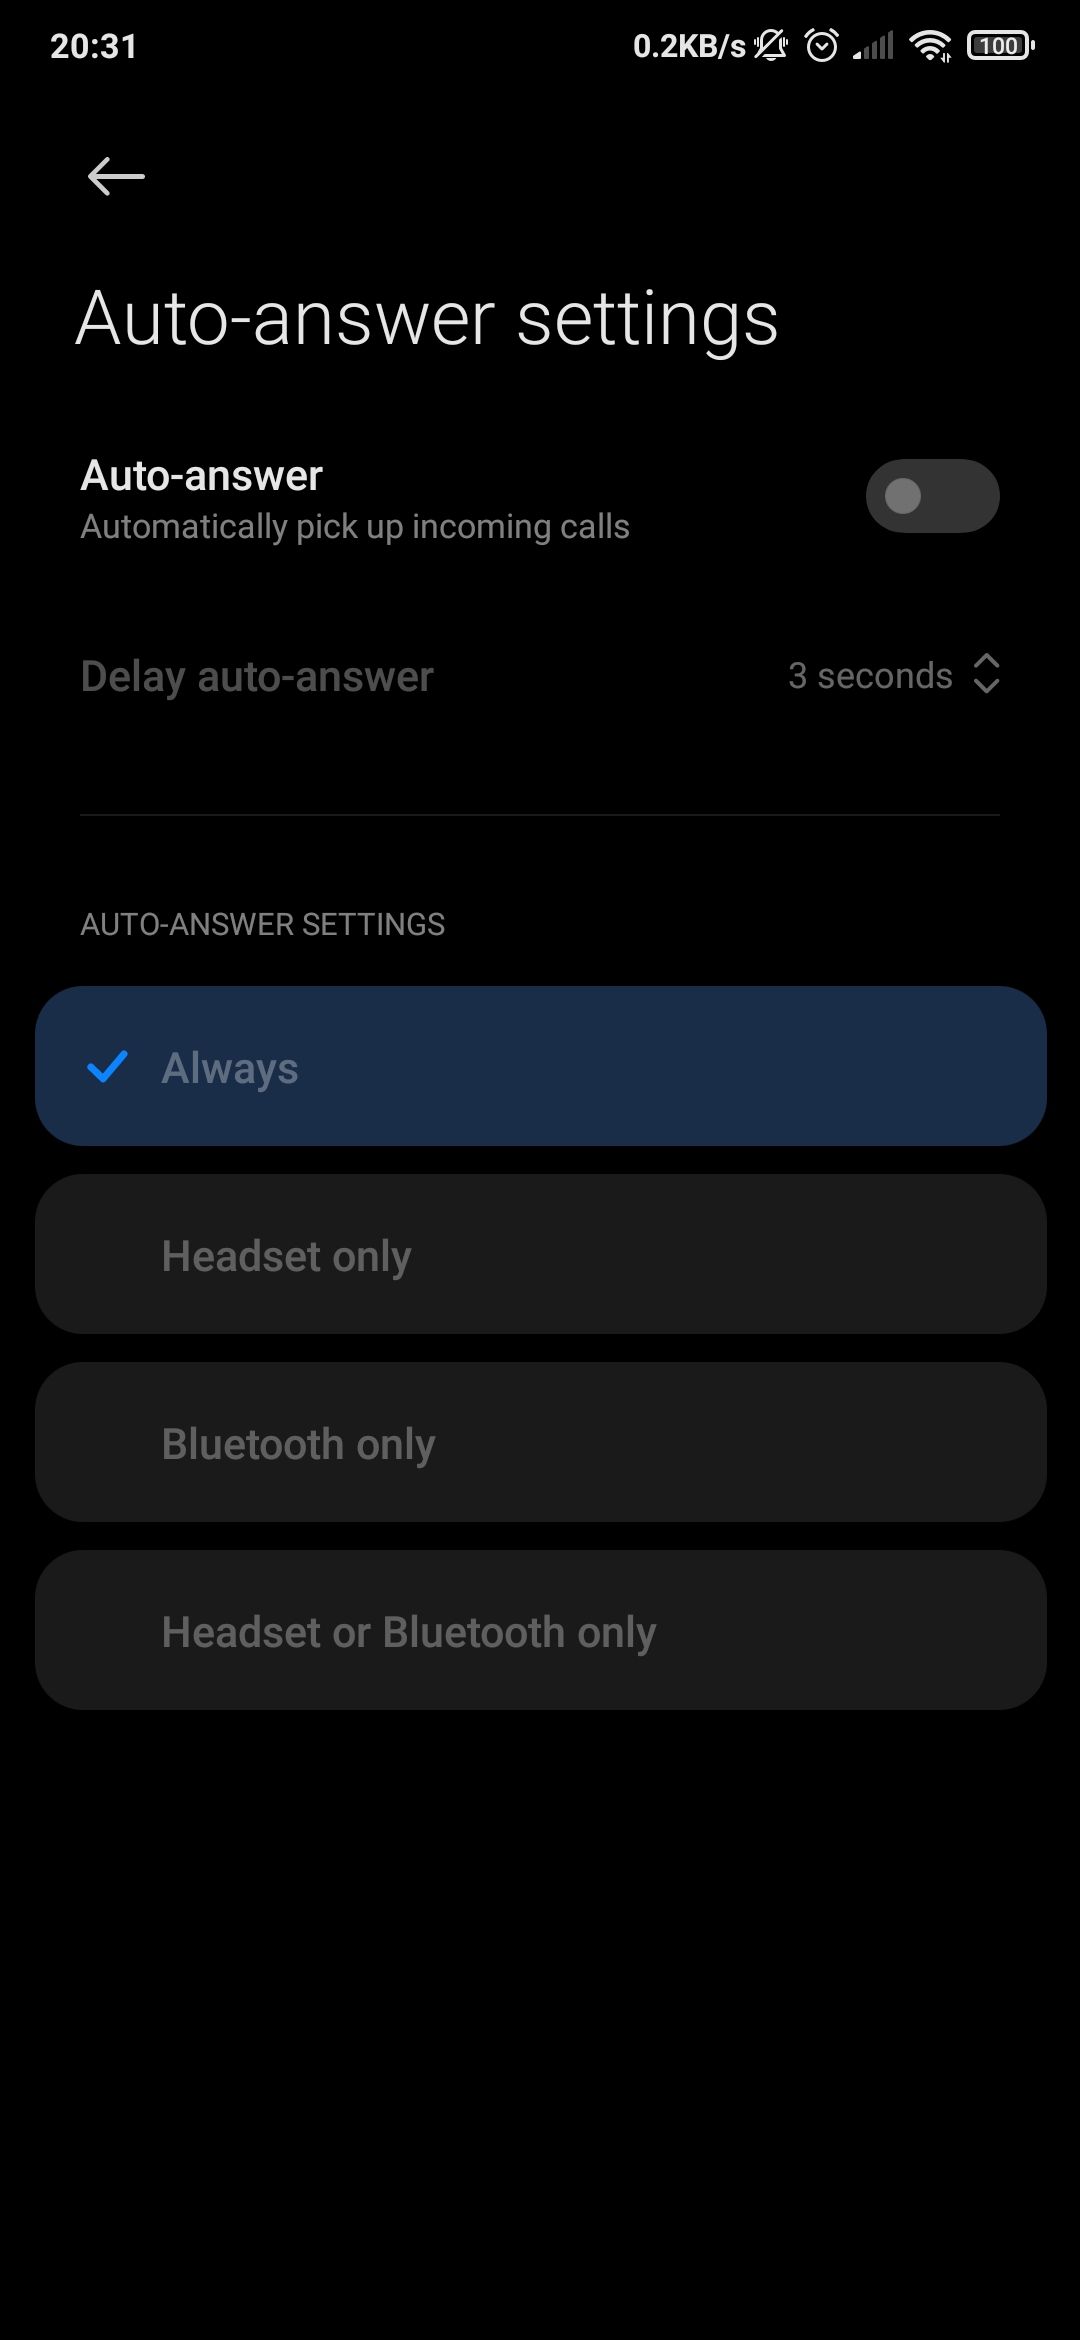 Auto-answer call settings in Google phone app